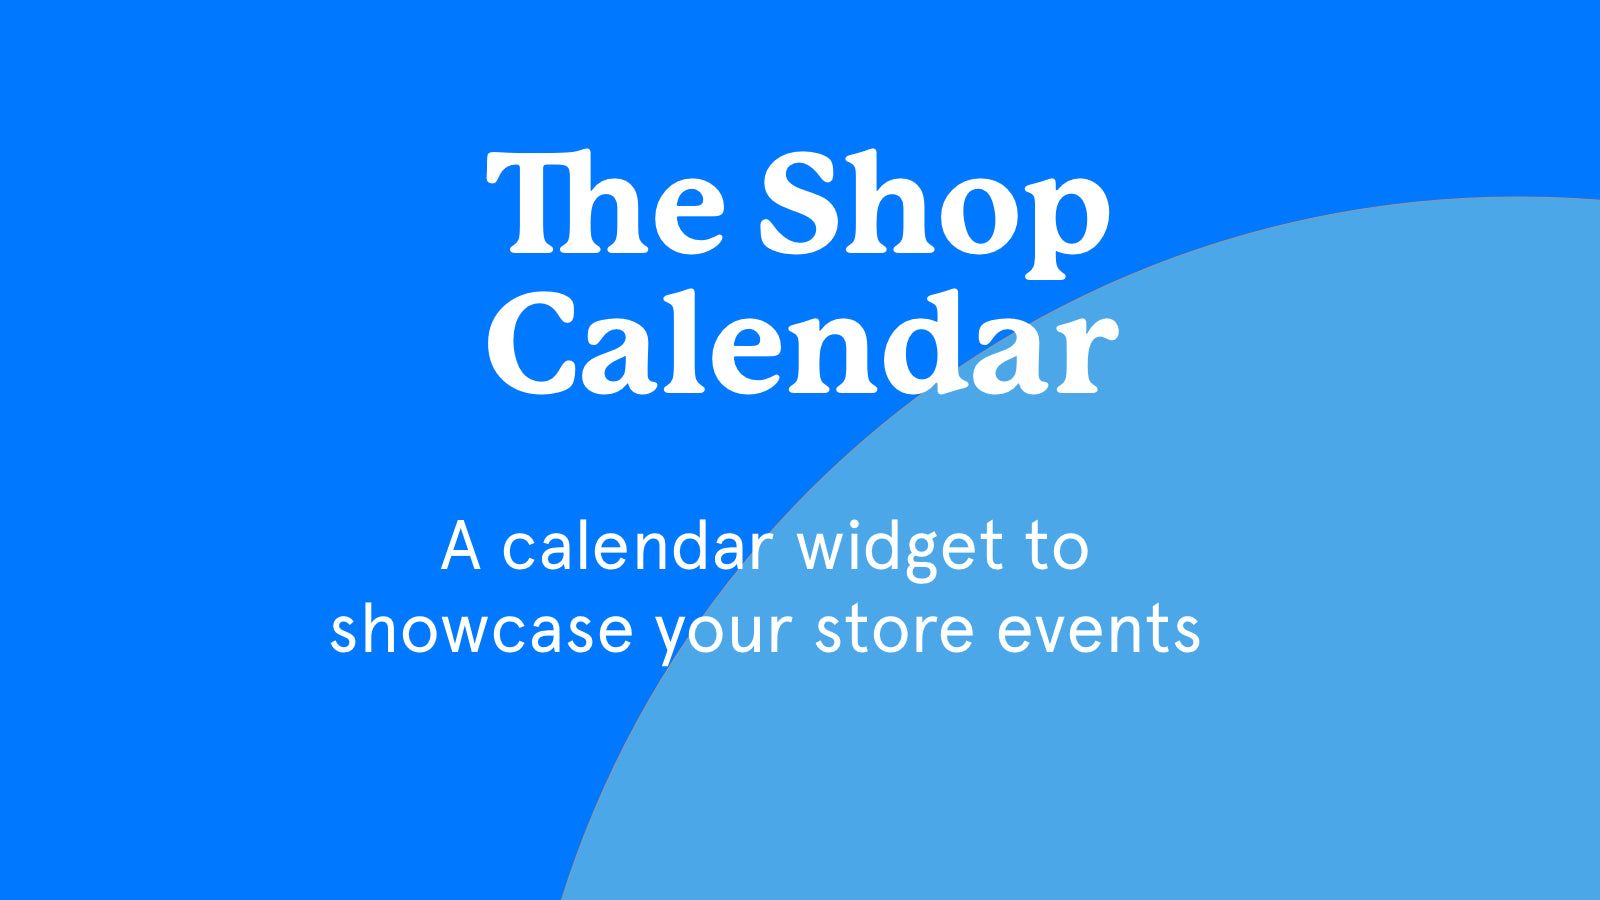 The best way to showcase your store events via a calendar